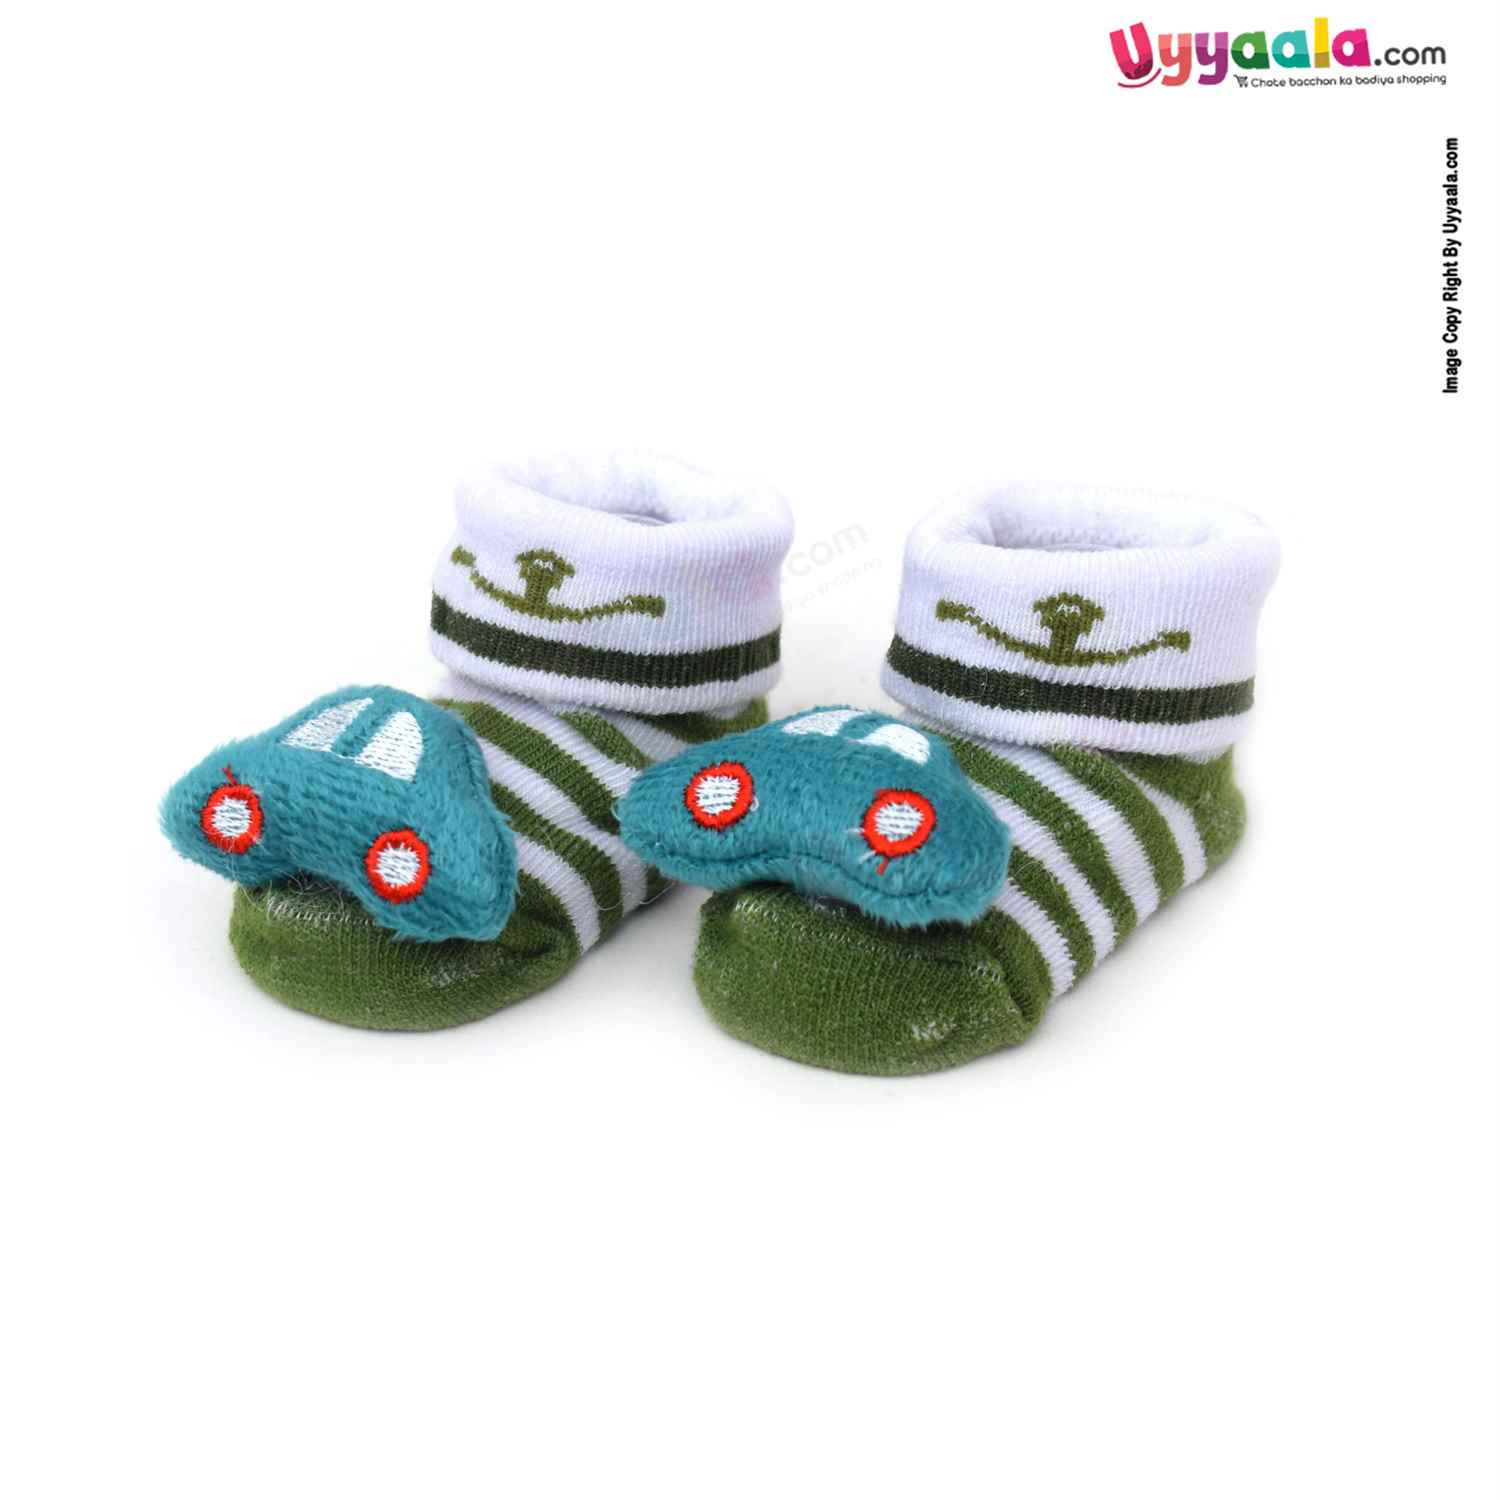 HERMAS Fashion Socks Car Character for Babies 0-12m Age - Green